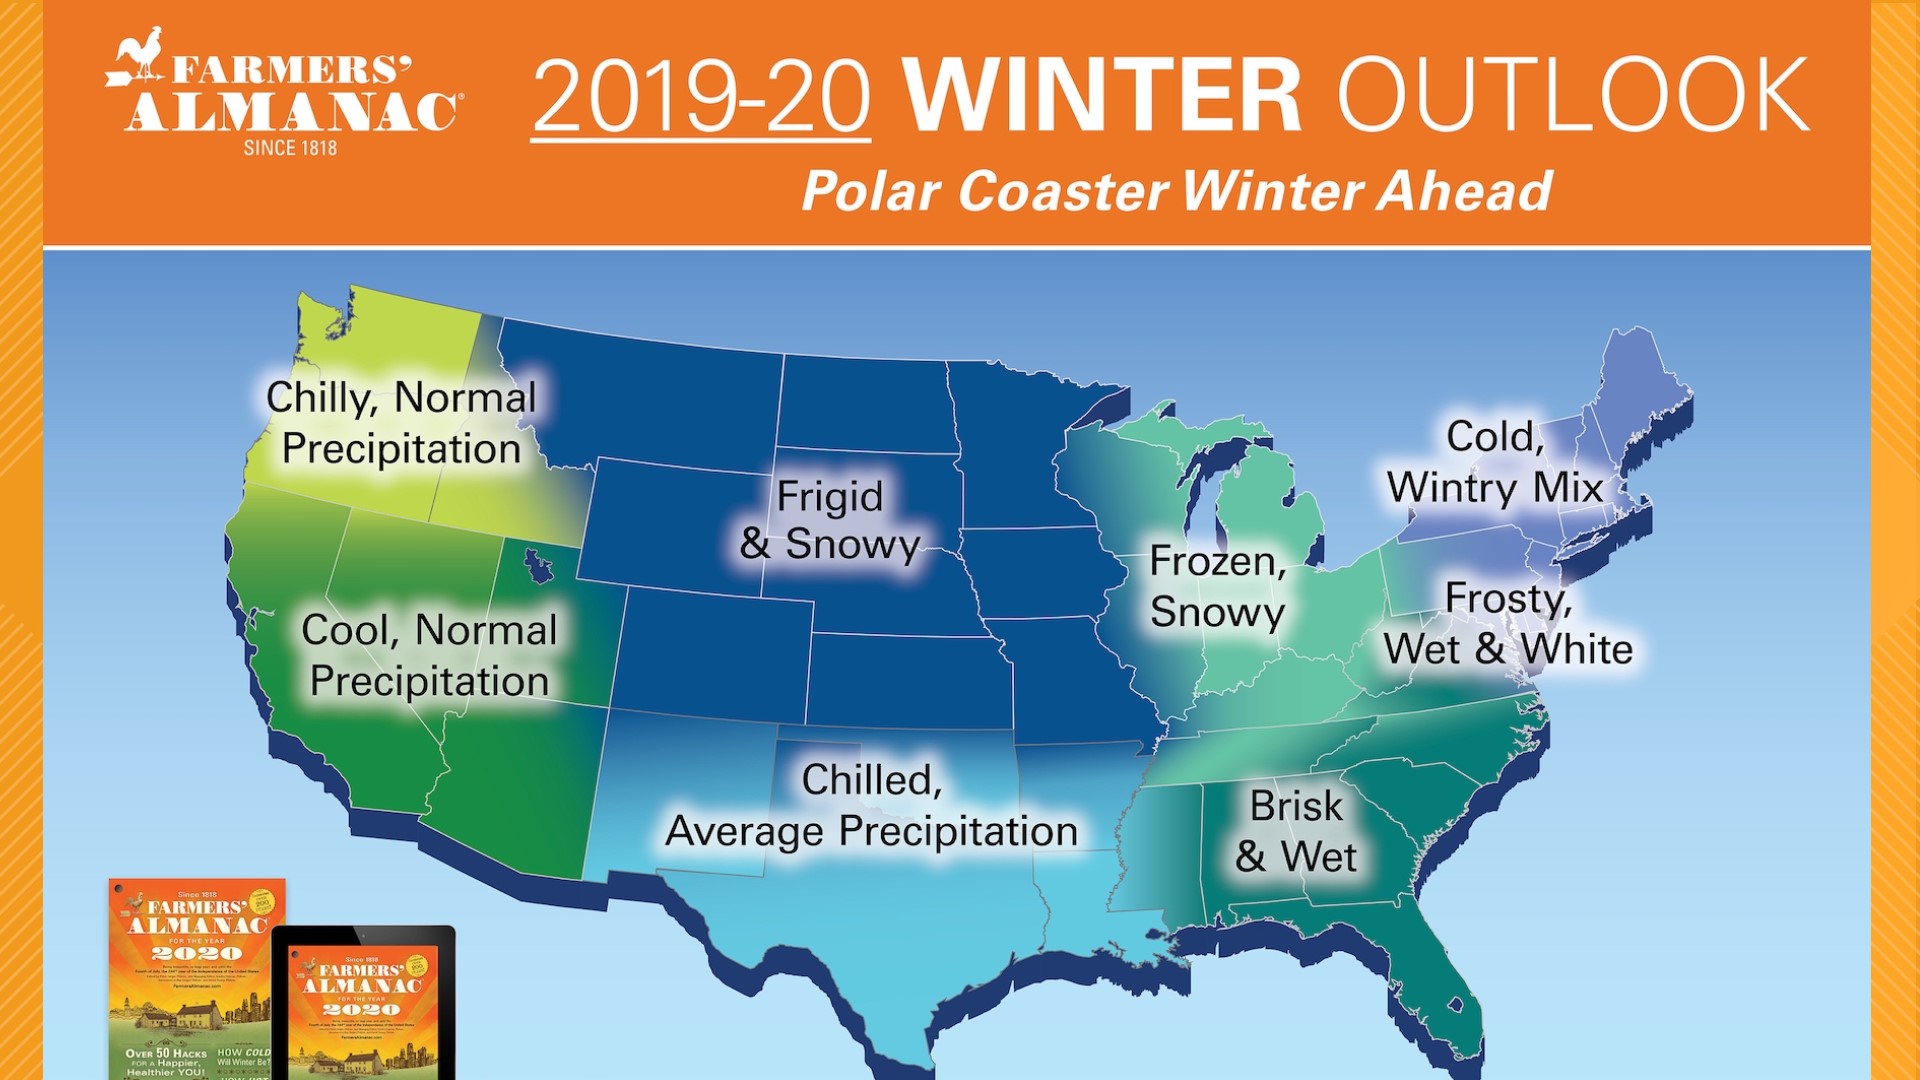 Old Farmer's Almanac calling for another warm, wet winter in East